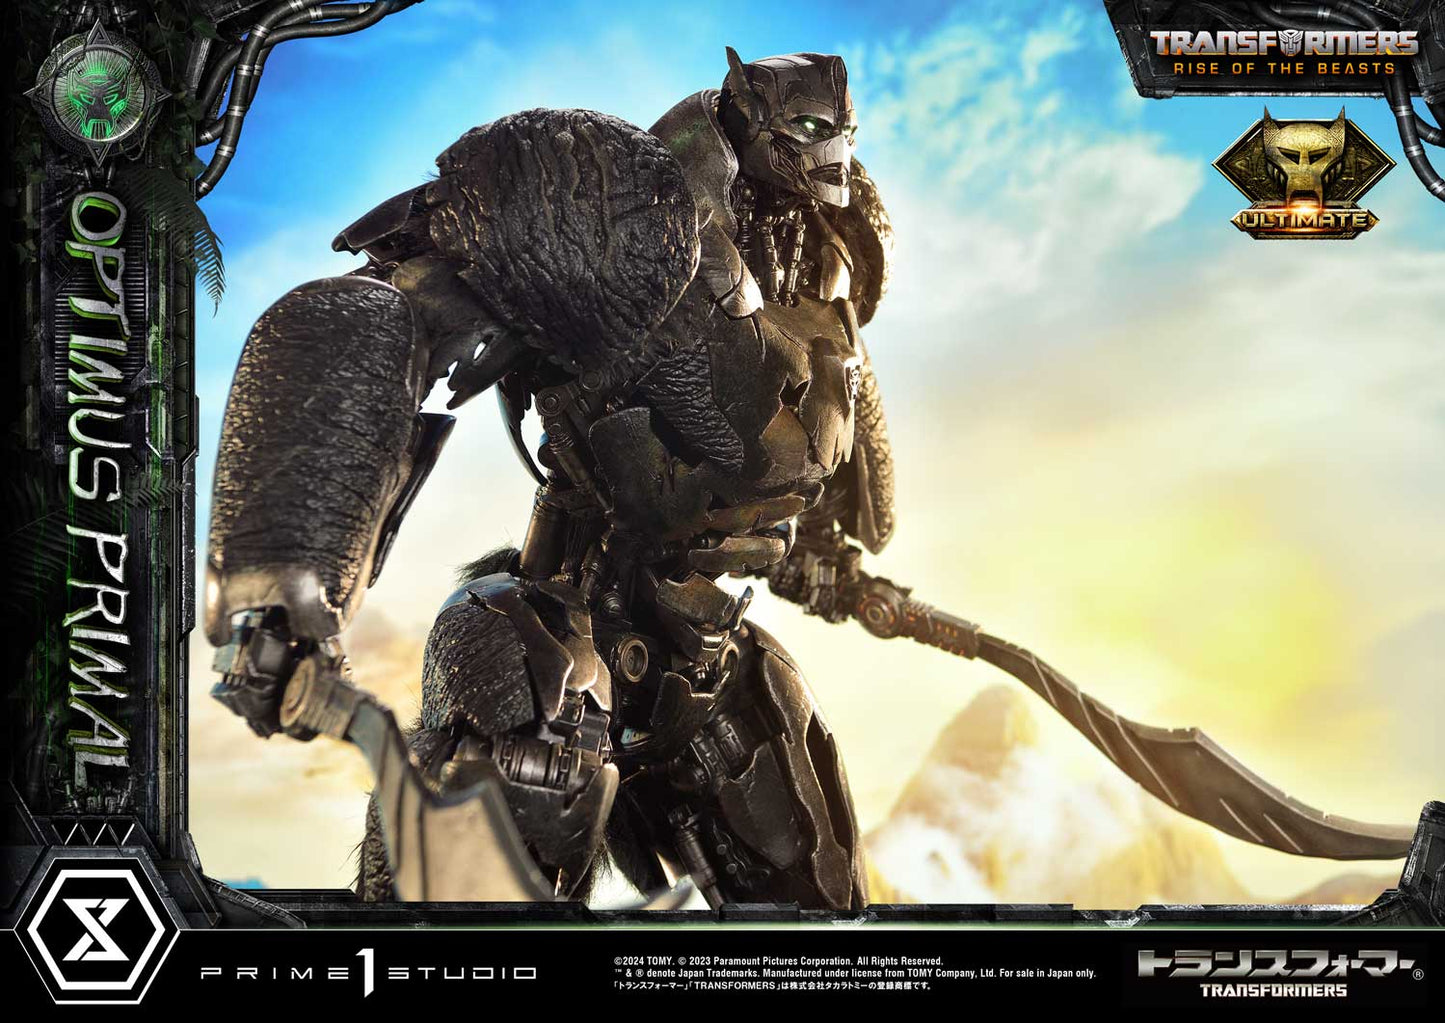 Museum Masterline "Transformers: Rise of the Beasts" Optimus Primal Ultimate Edition